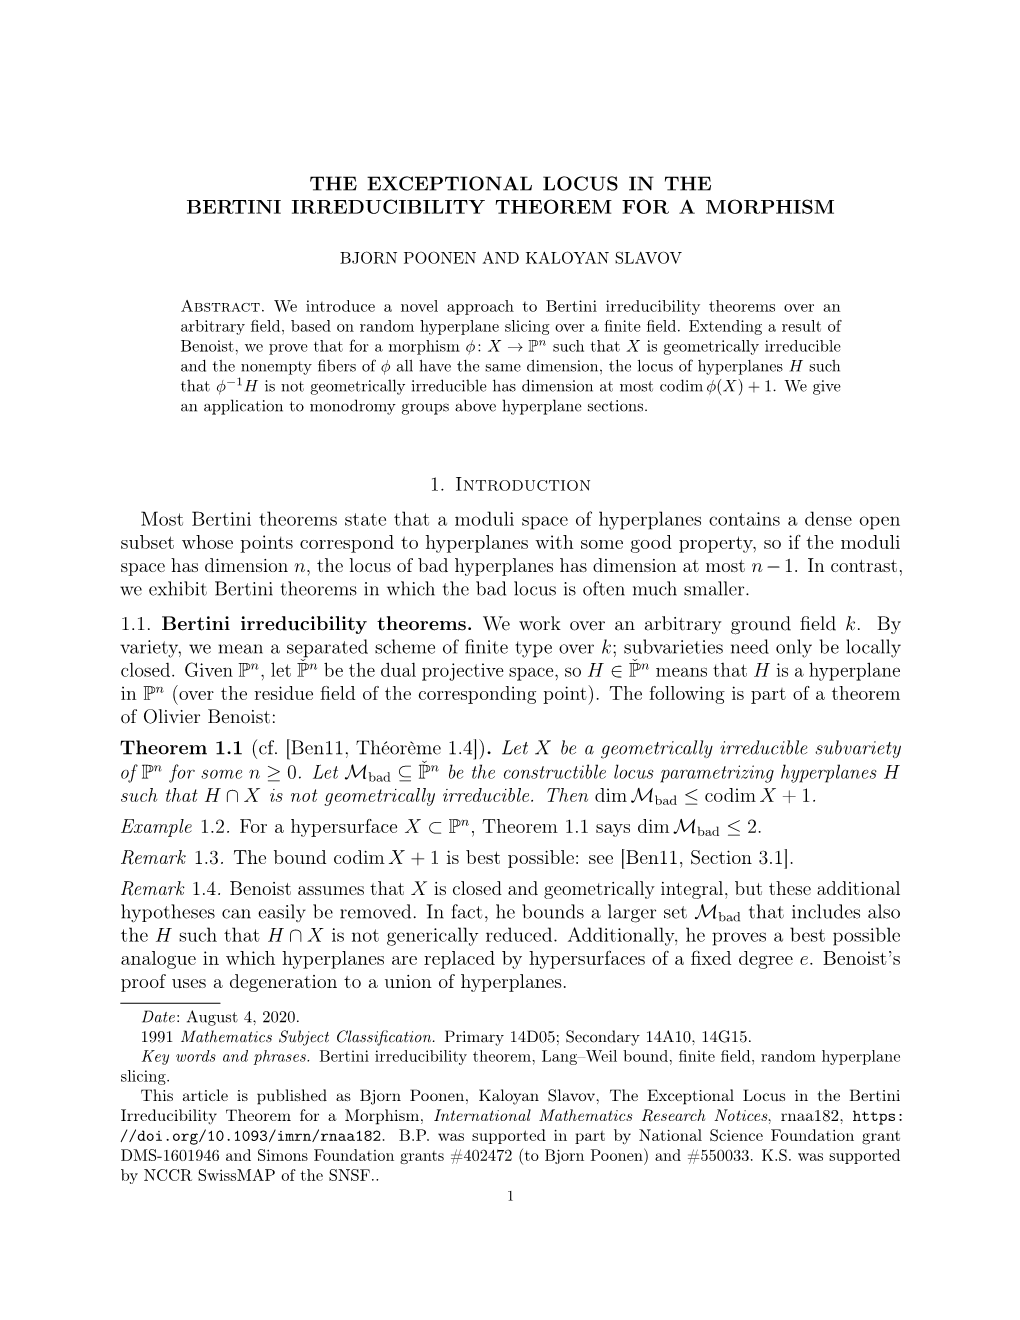 The Exceptional Locus in the Bertini Irreducibility Theorem for a Morphism